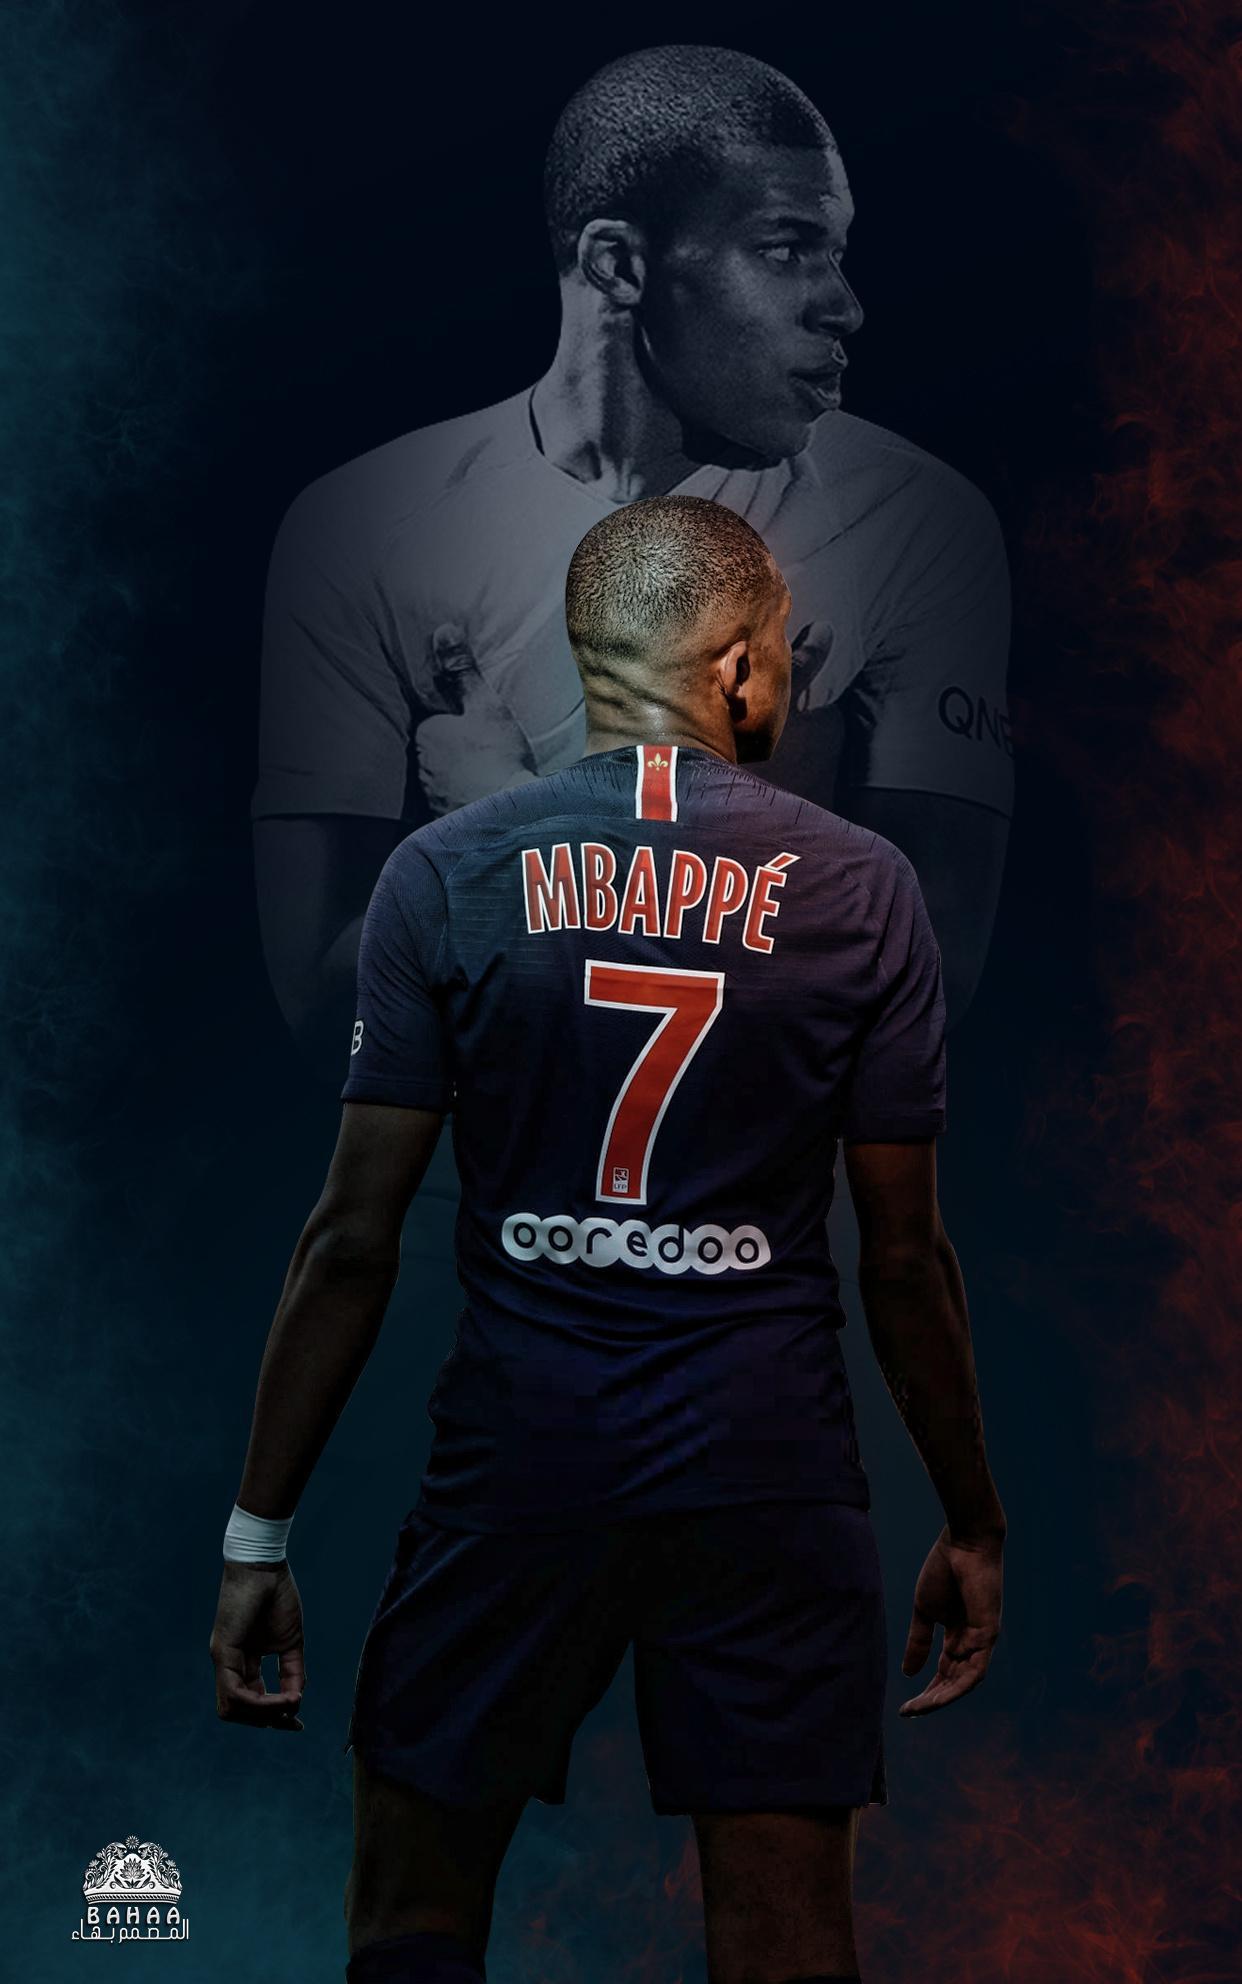 Mbappe Wallpaper 2019 for Android